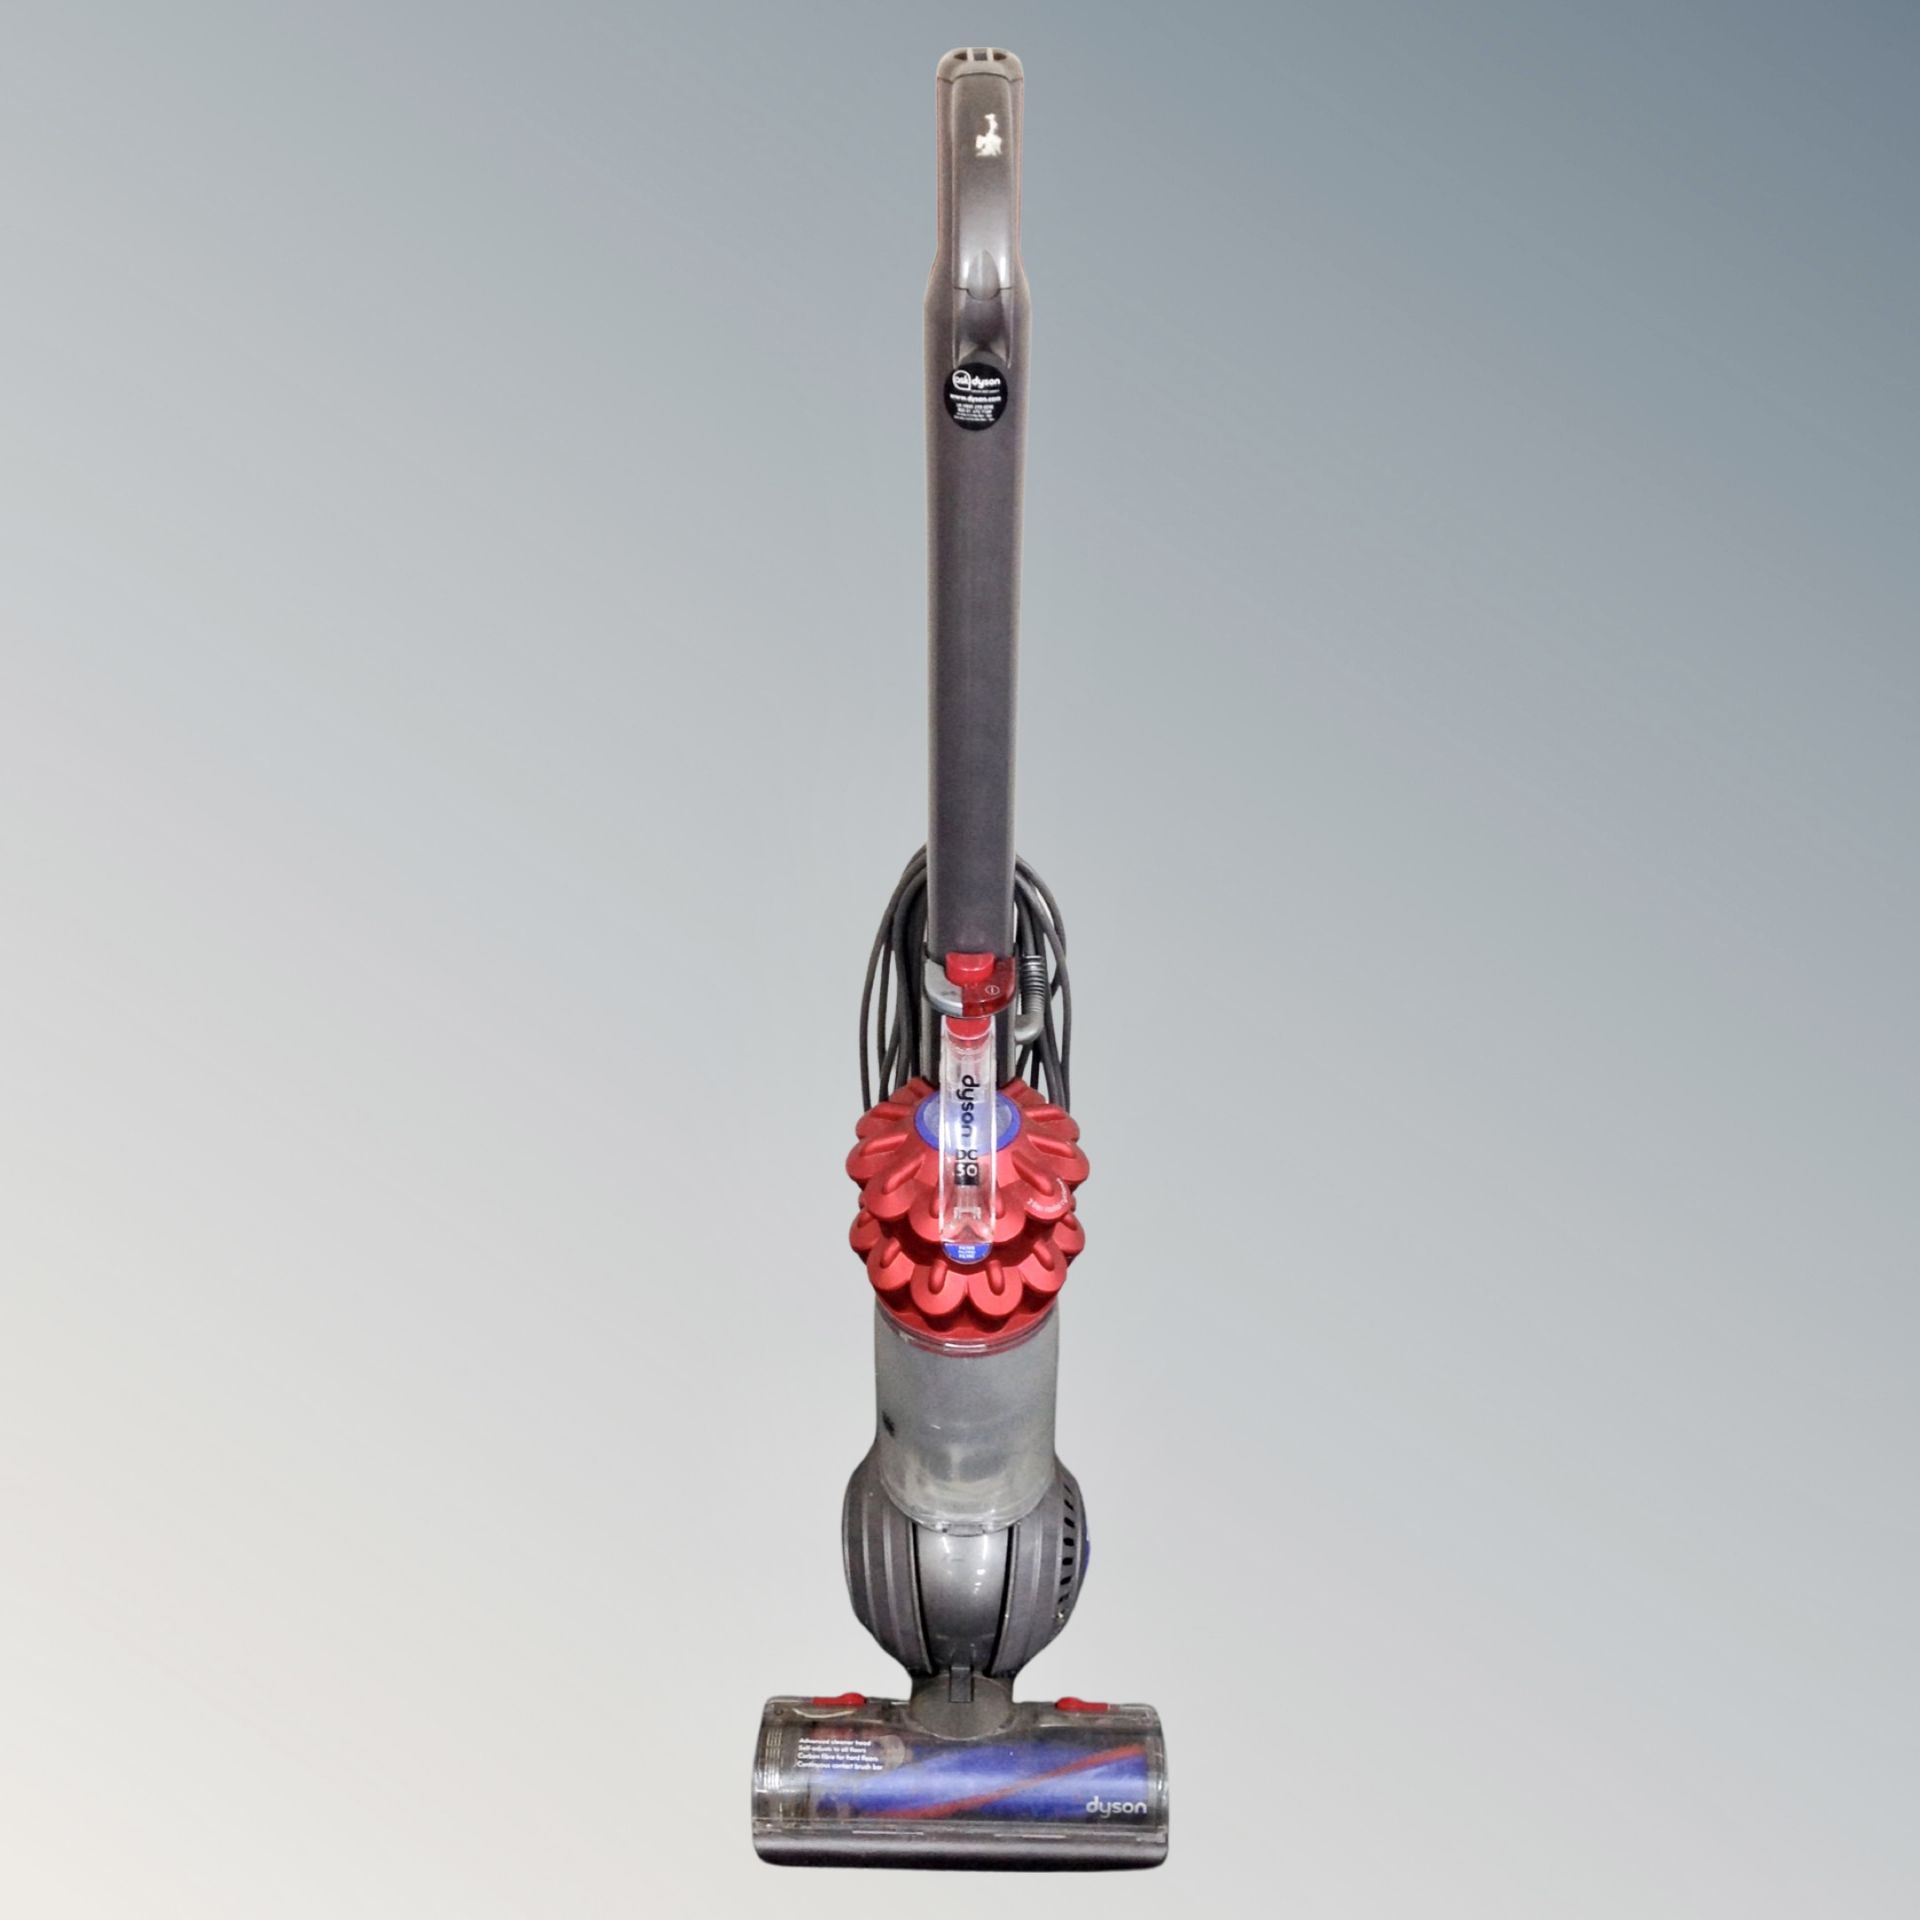 A Dyson DC 50 ball vacuum cleaner